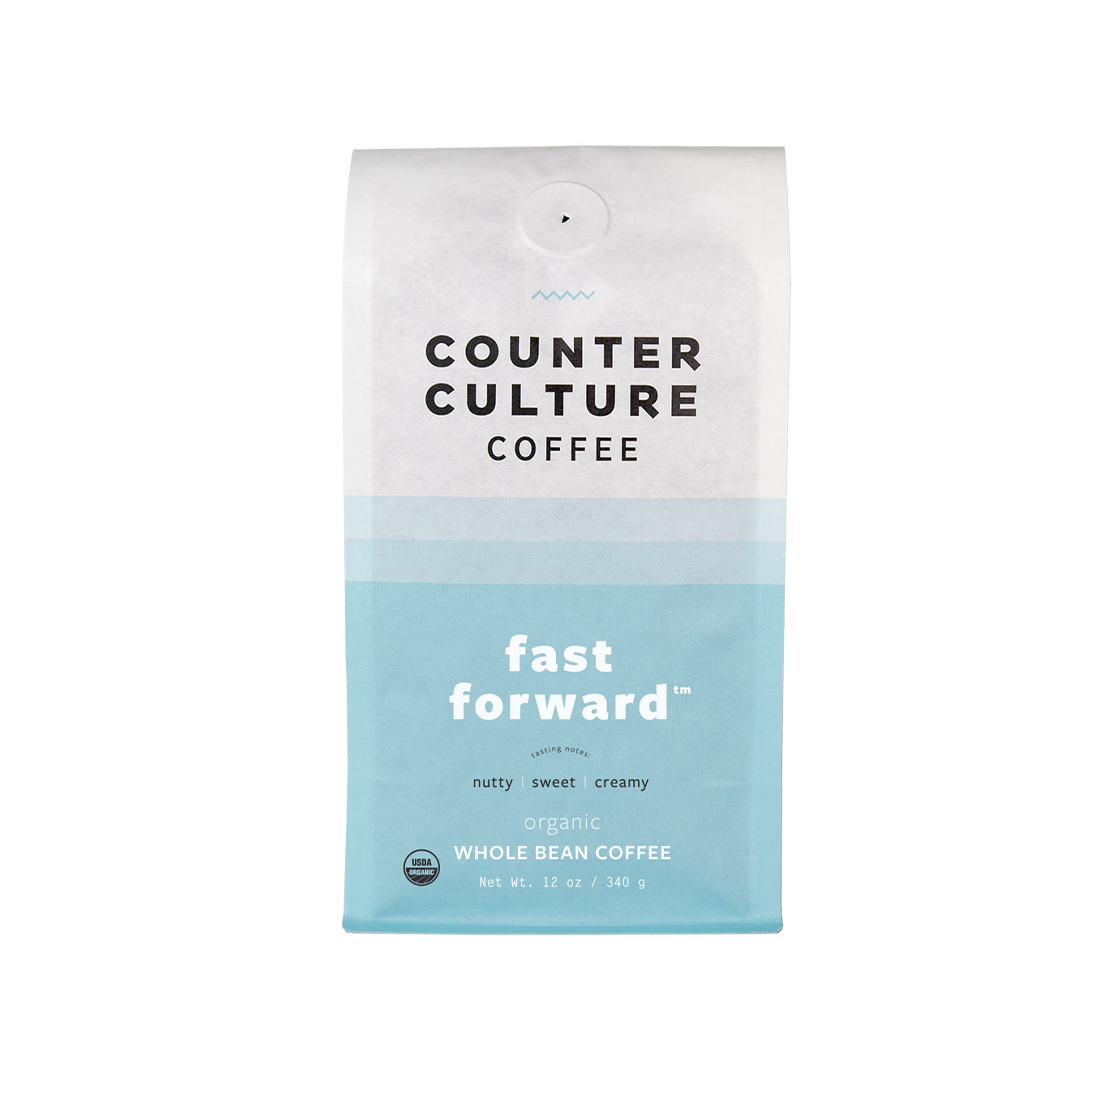 Counter Culture Forty-Six Whole Bean Coffee